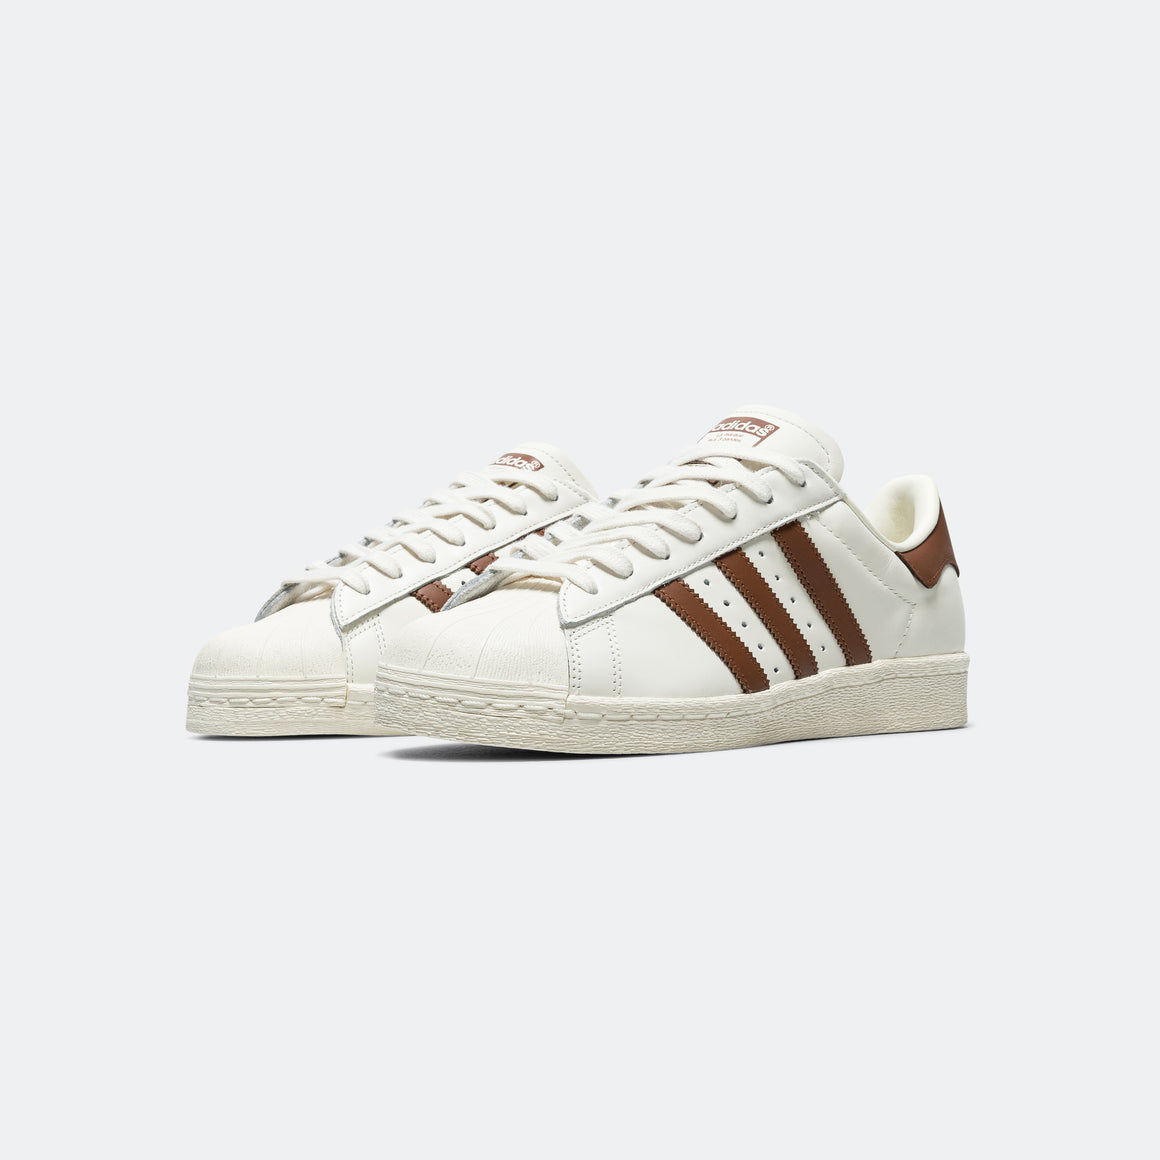 adidas - Superstar 82 - Cloud White/Preloved Brown-Off White - UP THERE